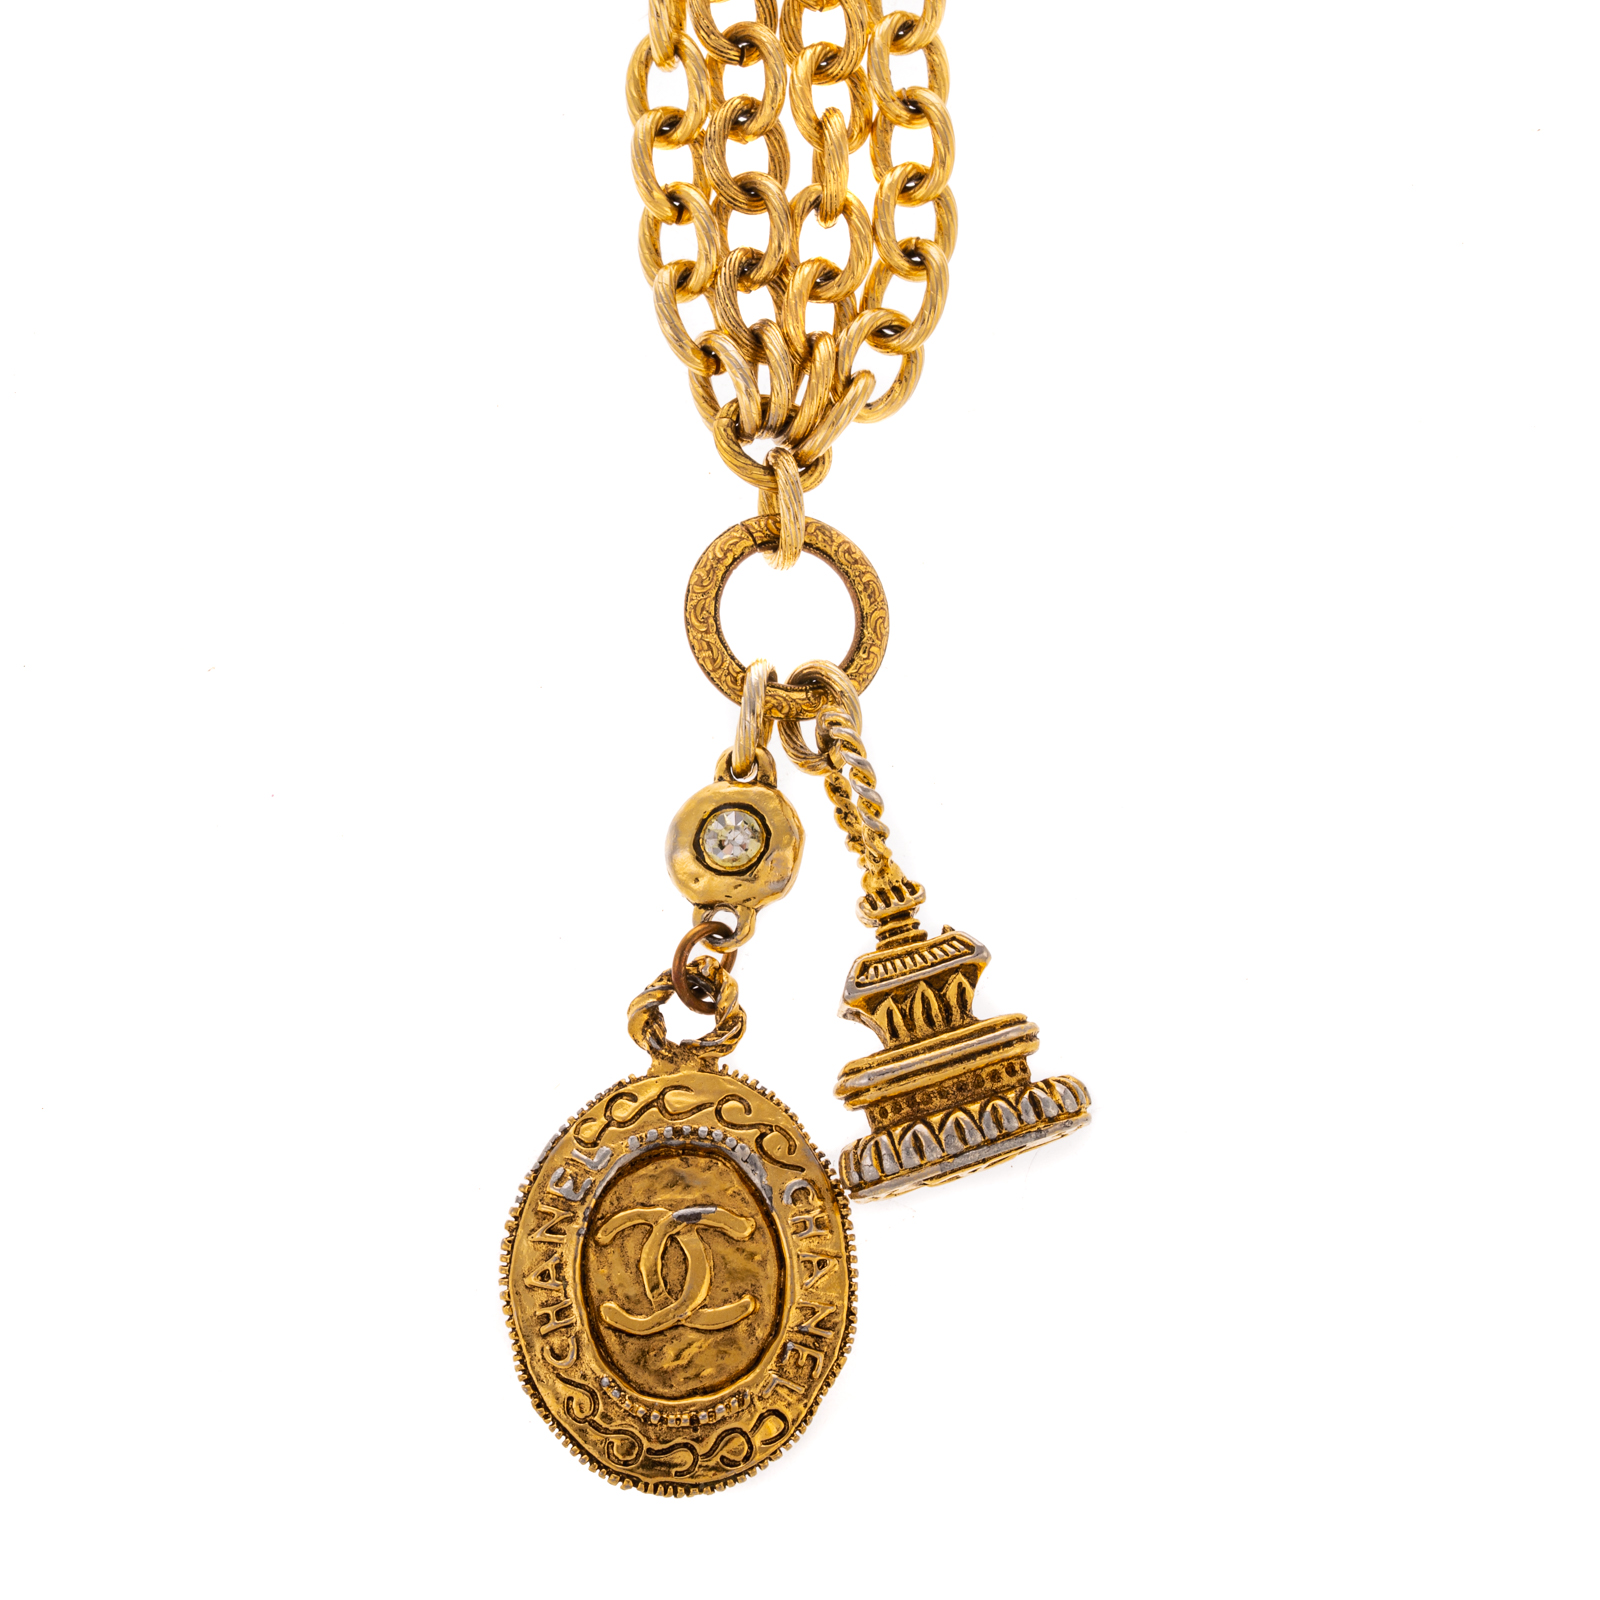 A CHANEL CC PAGODA NECKLACE A gold